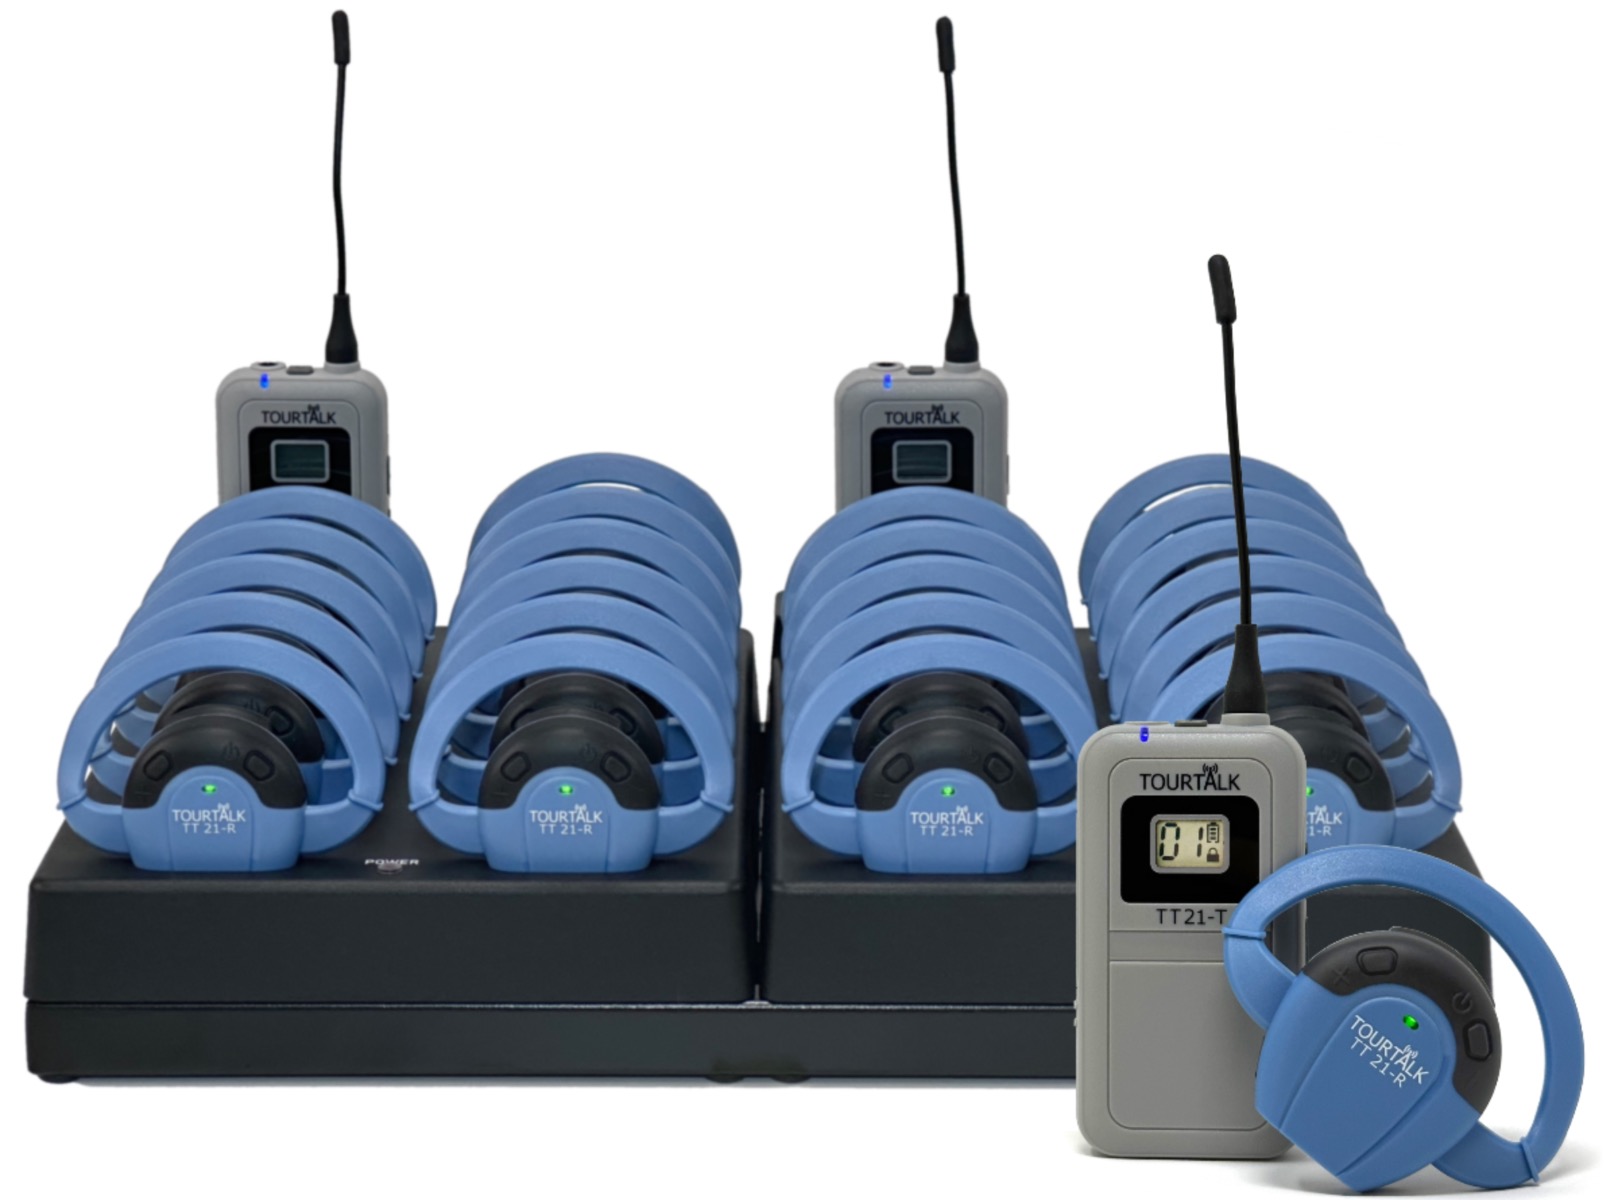 New Tourtalk TT 21 system transmitters, receivers and charger